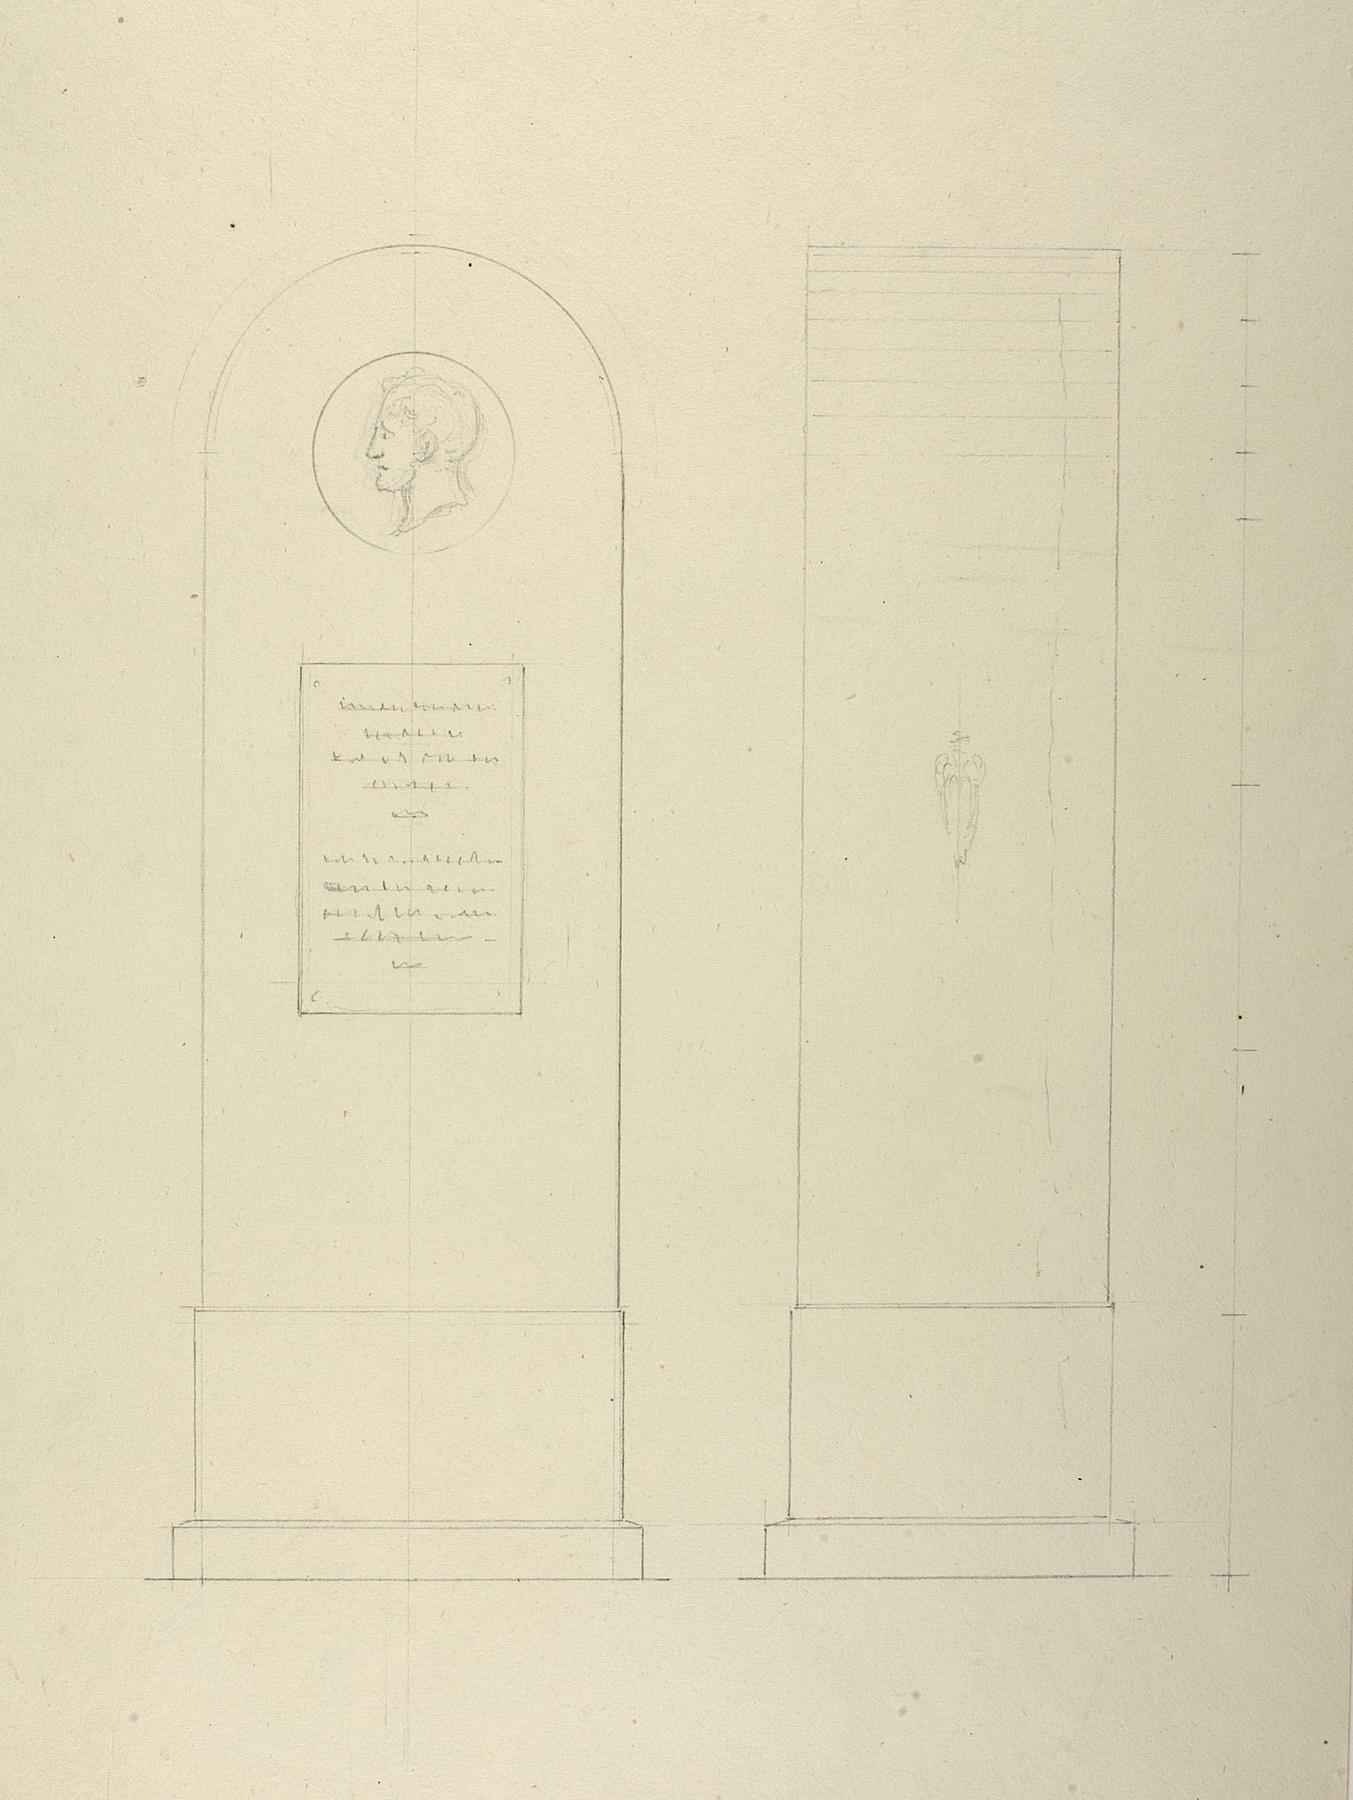 Tombstone to August von Goethe, elevations, D1577